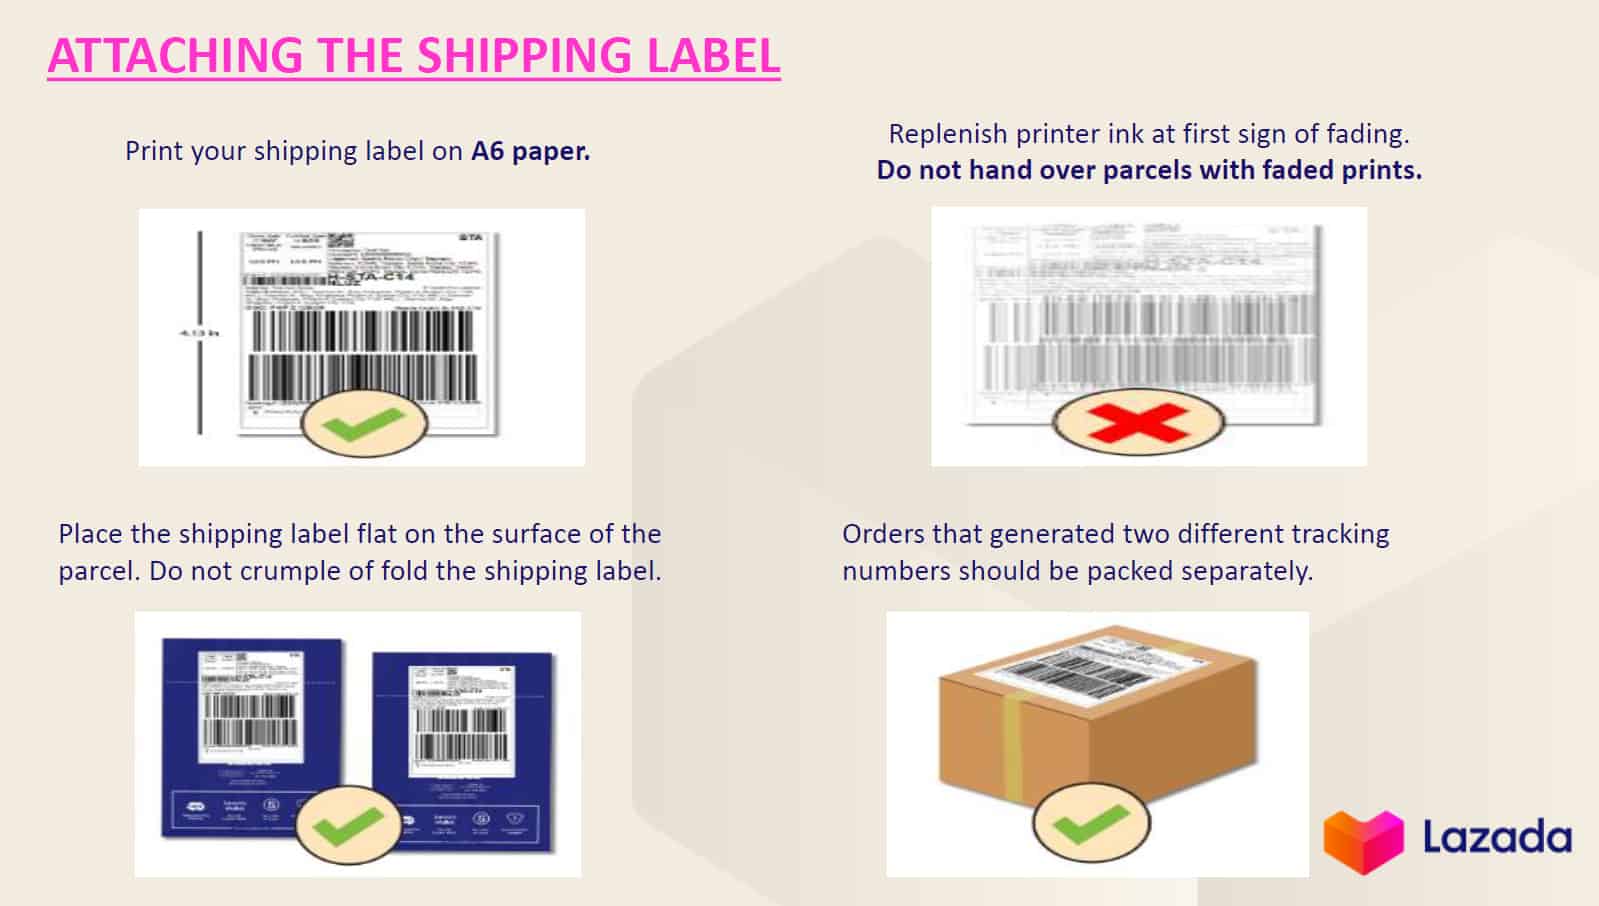 laszada drop off SHIPPING LABEL from grandson travel and tours